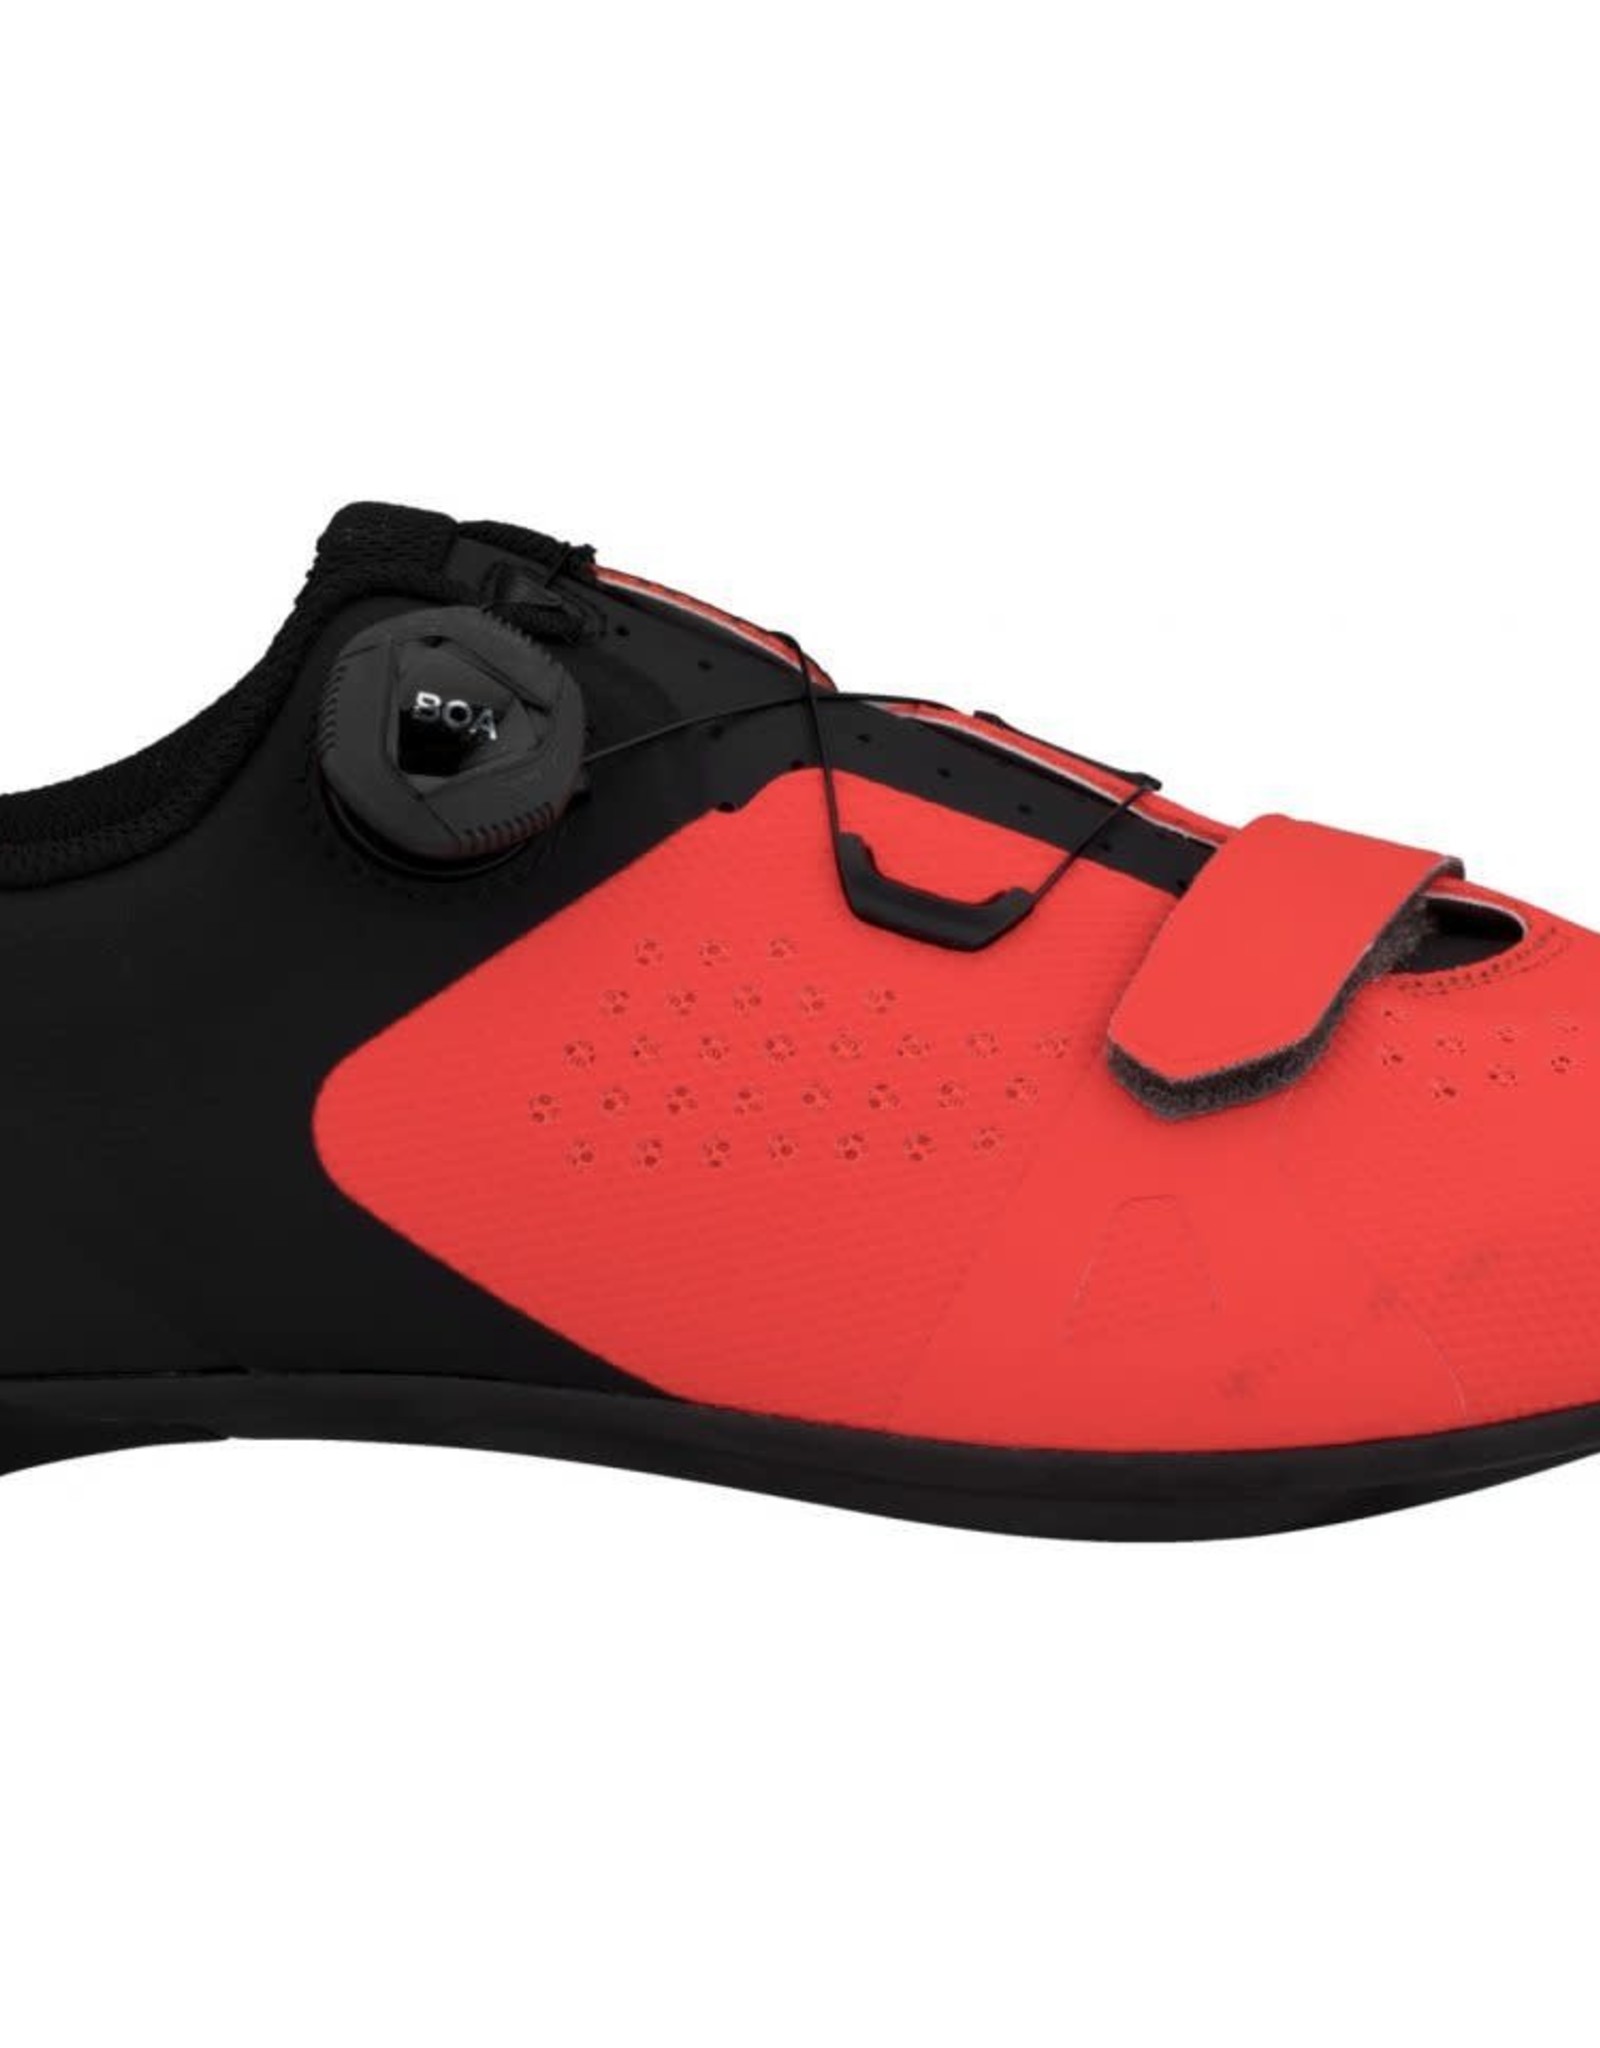 SPECIALIZED Specialized TORCH 2.0 Road SHOE RED/BLK 44.5